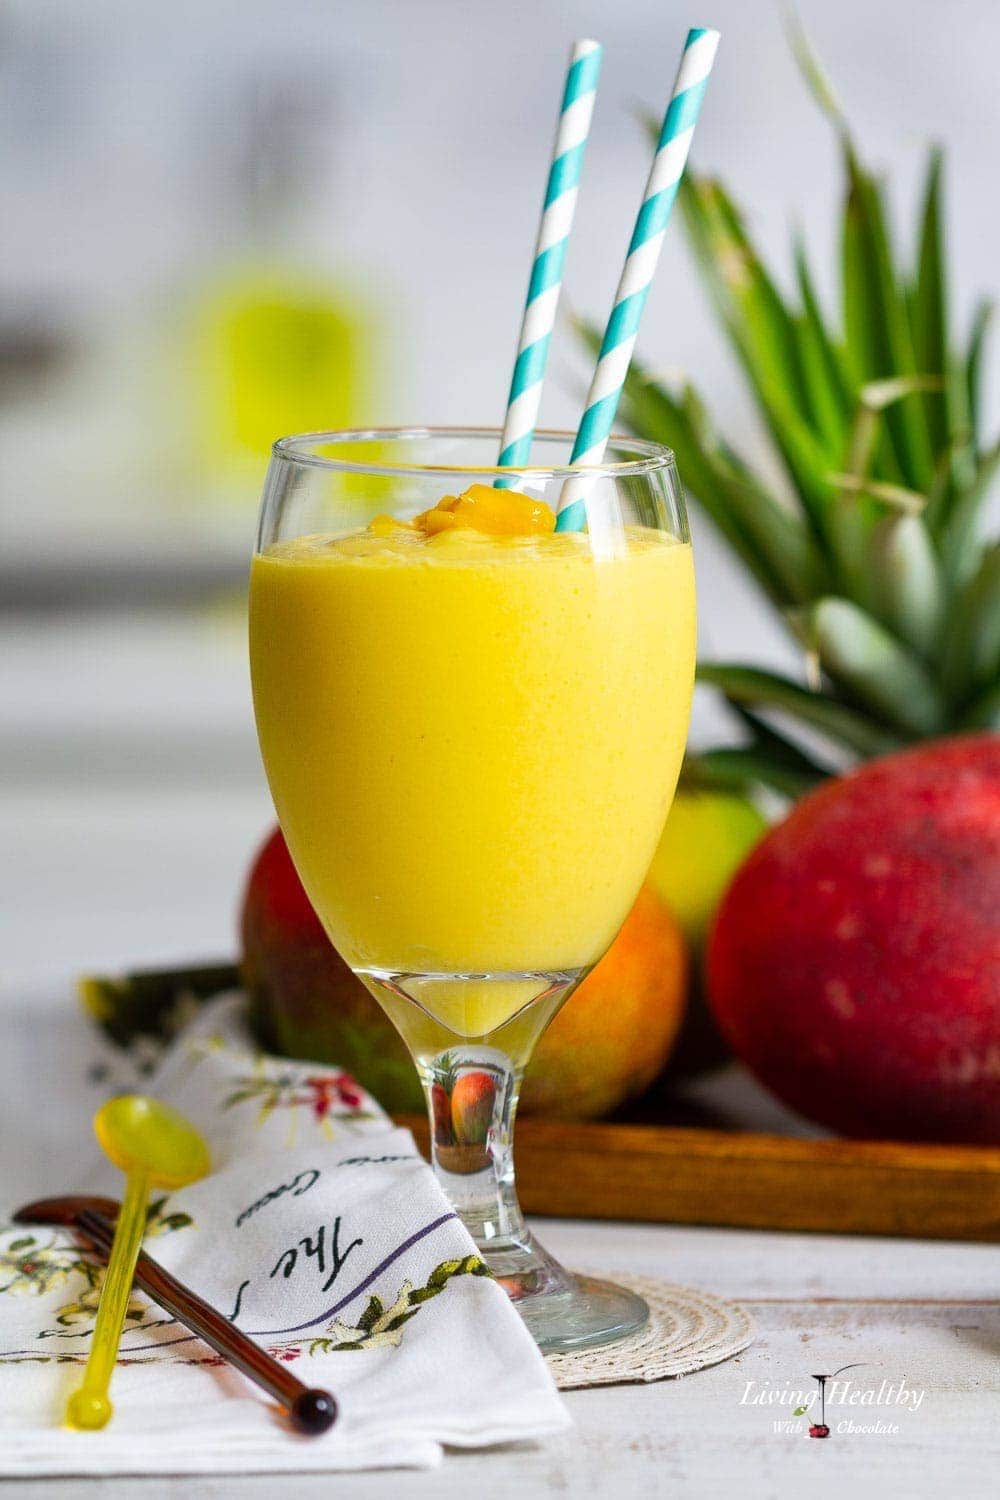 A close up of a mango smoothie with a plate of pineapple and mango behind